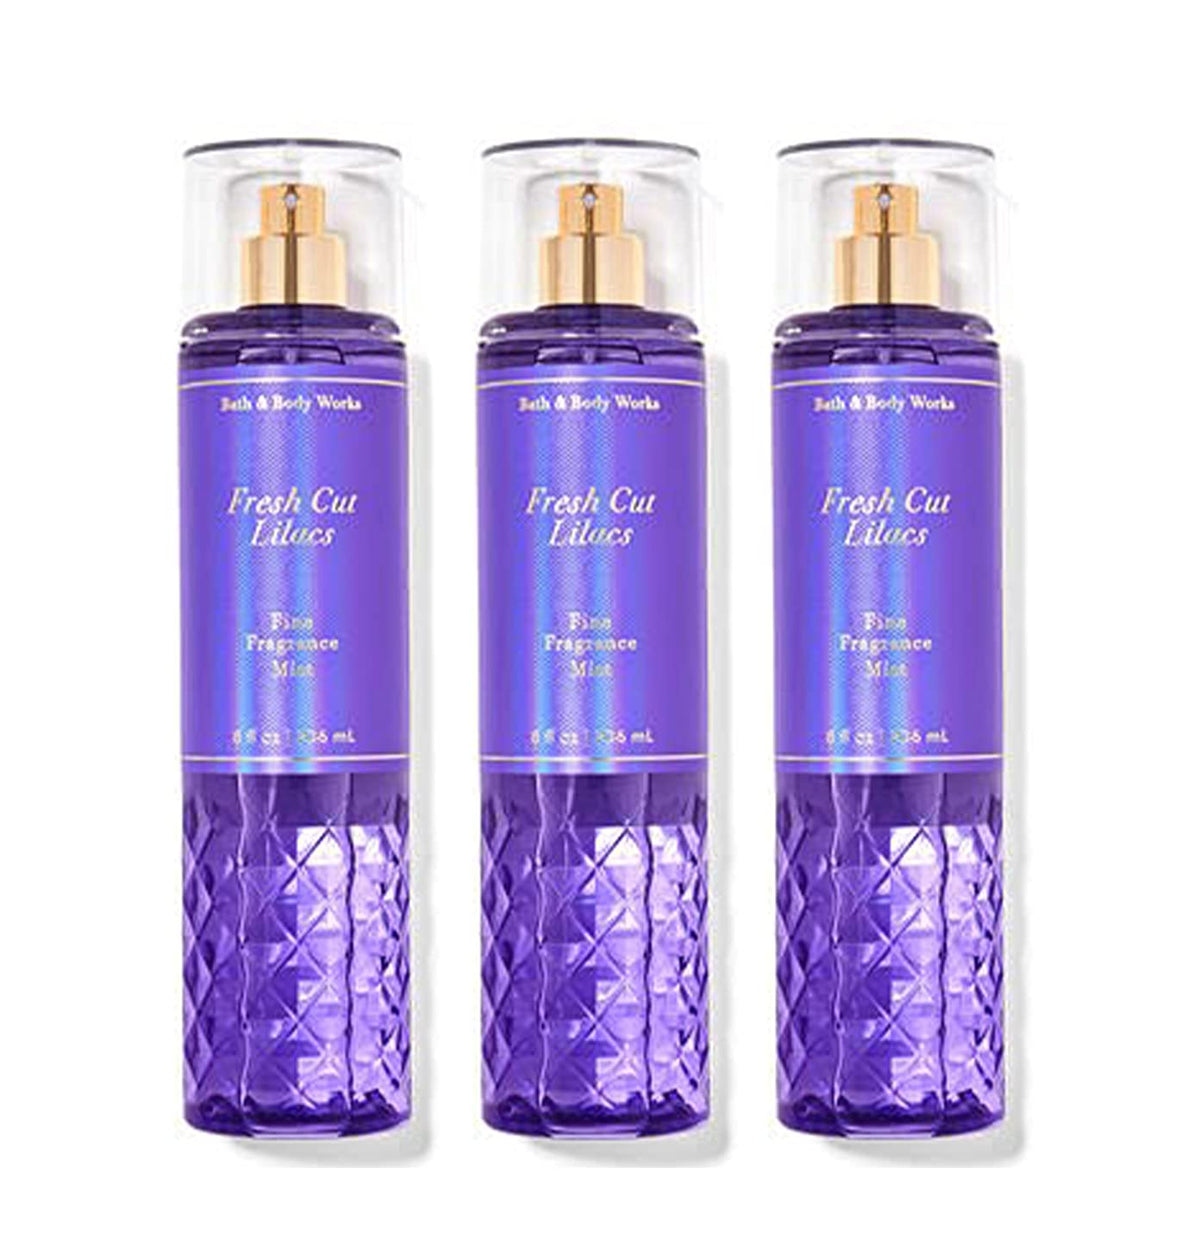 Bath and Body Works Freash Cut Lilacs Signature Collection Fragrance Mist Perfume Spray 8 Ounce Pack Of 3 (Freash Cut Lilacs)